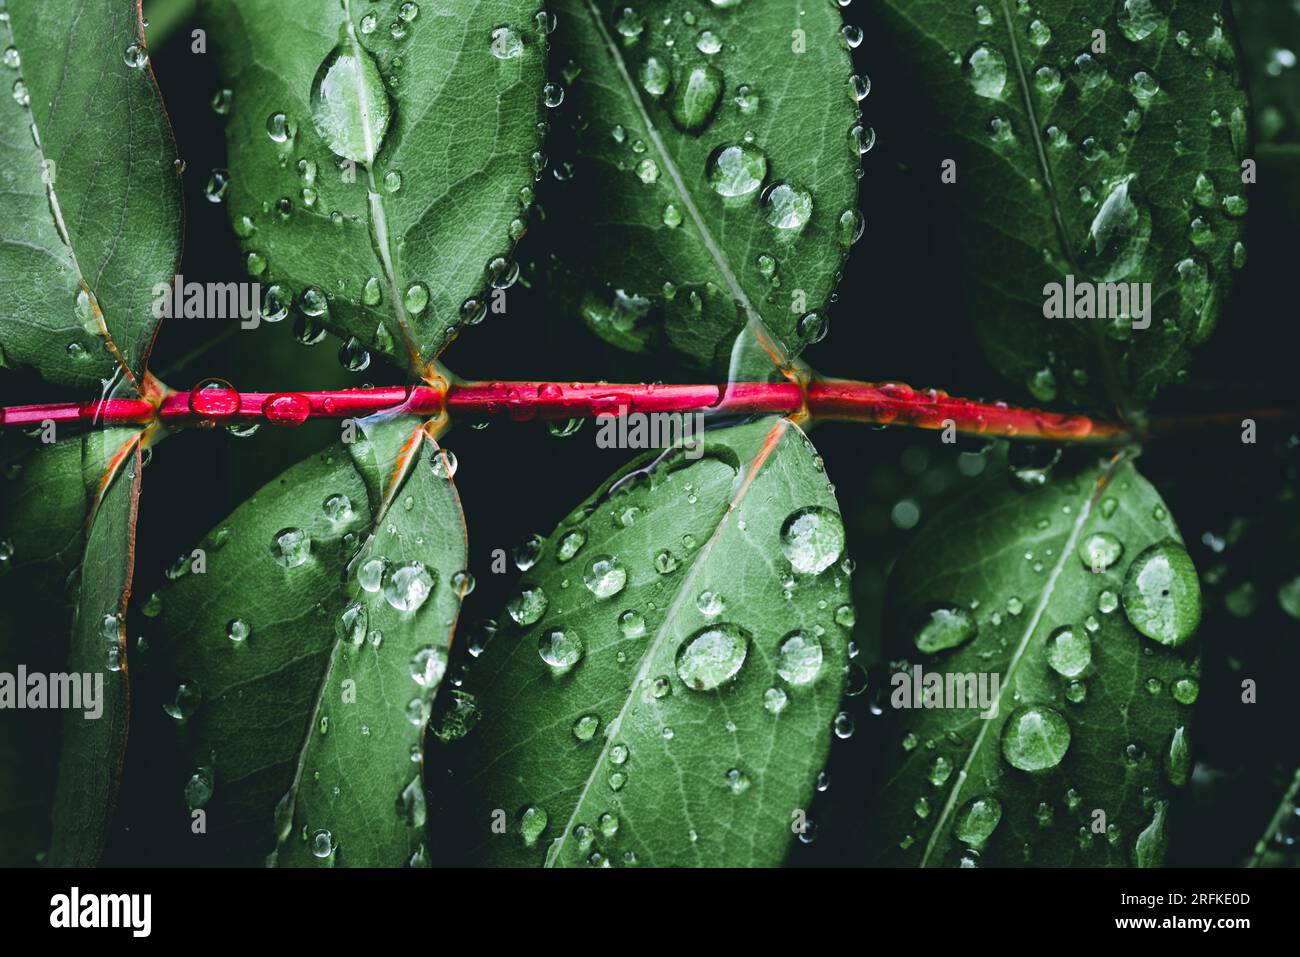 Background, pattern. Raindrops on green leaves. Stock Photo